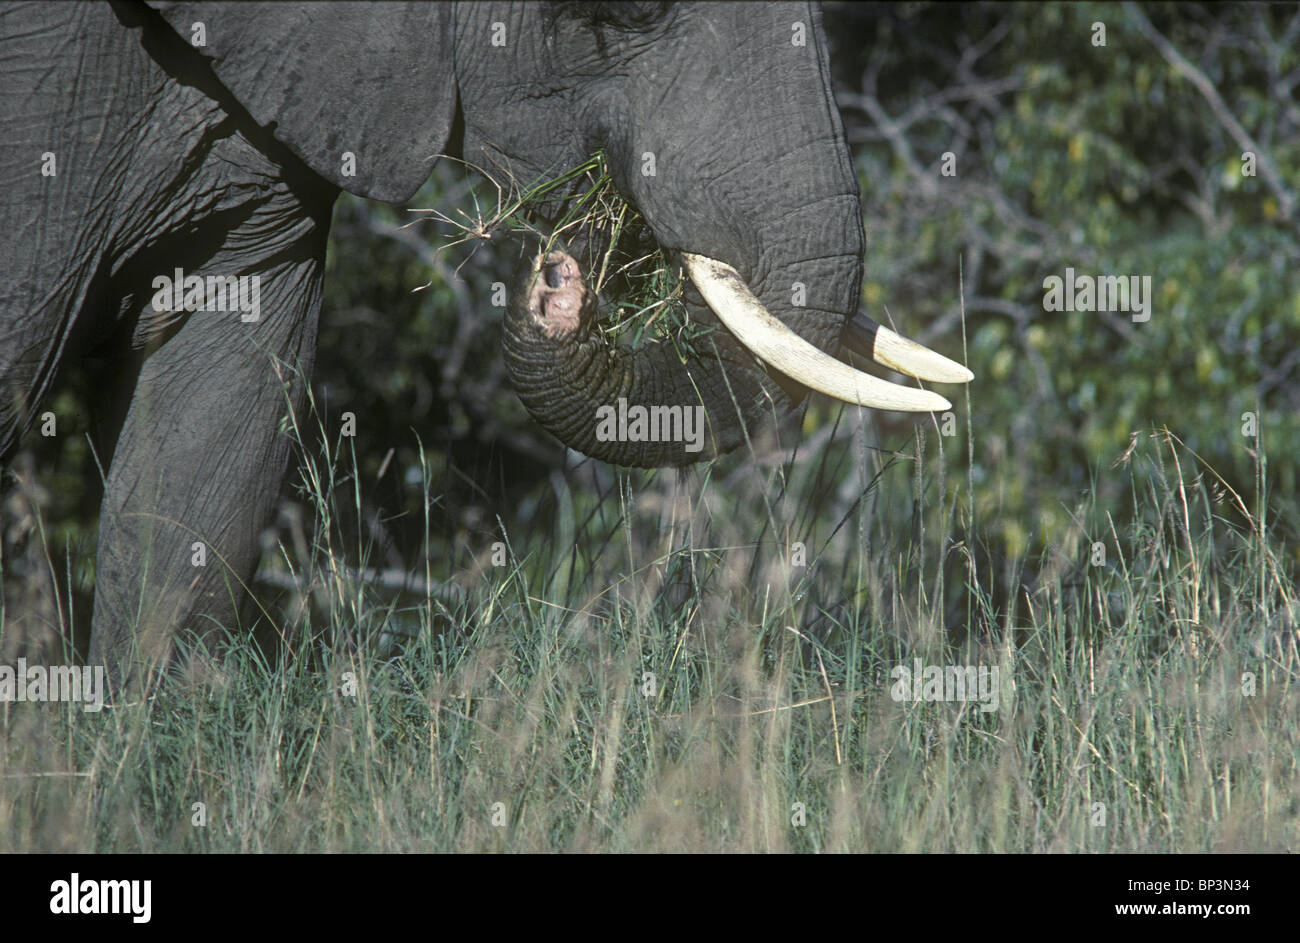 Elephant with injured severed trunk damaged by poachers wire snare Masai Mara National Reserve Kenya East Africa Stock Photo